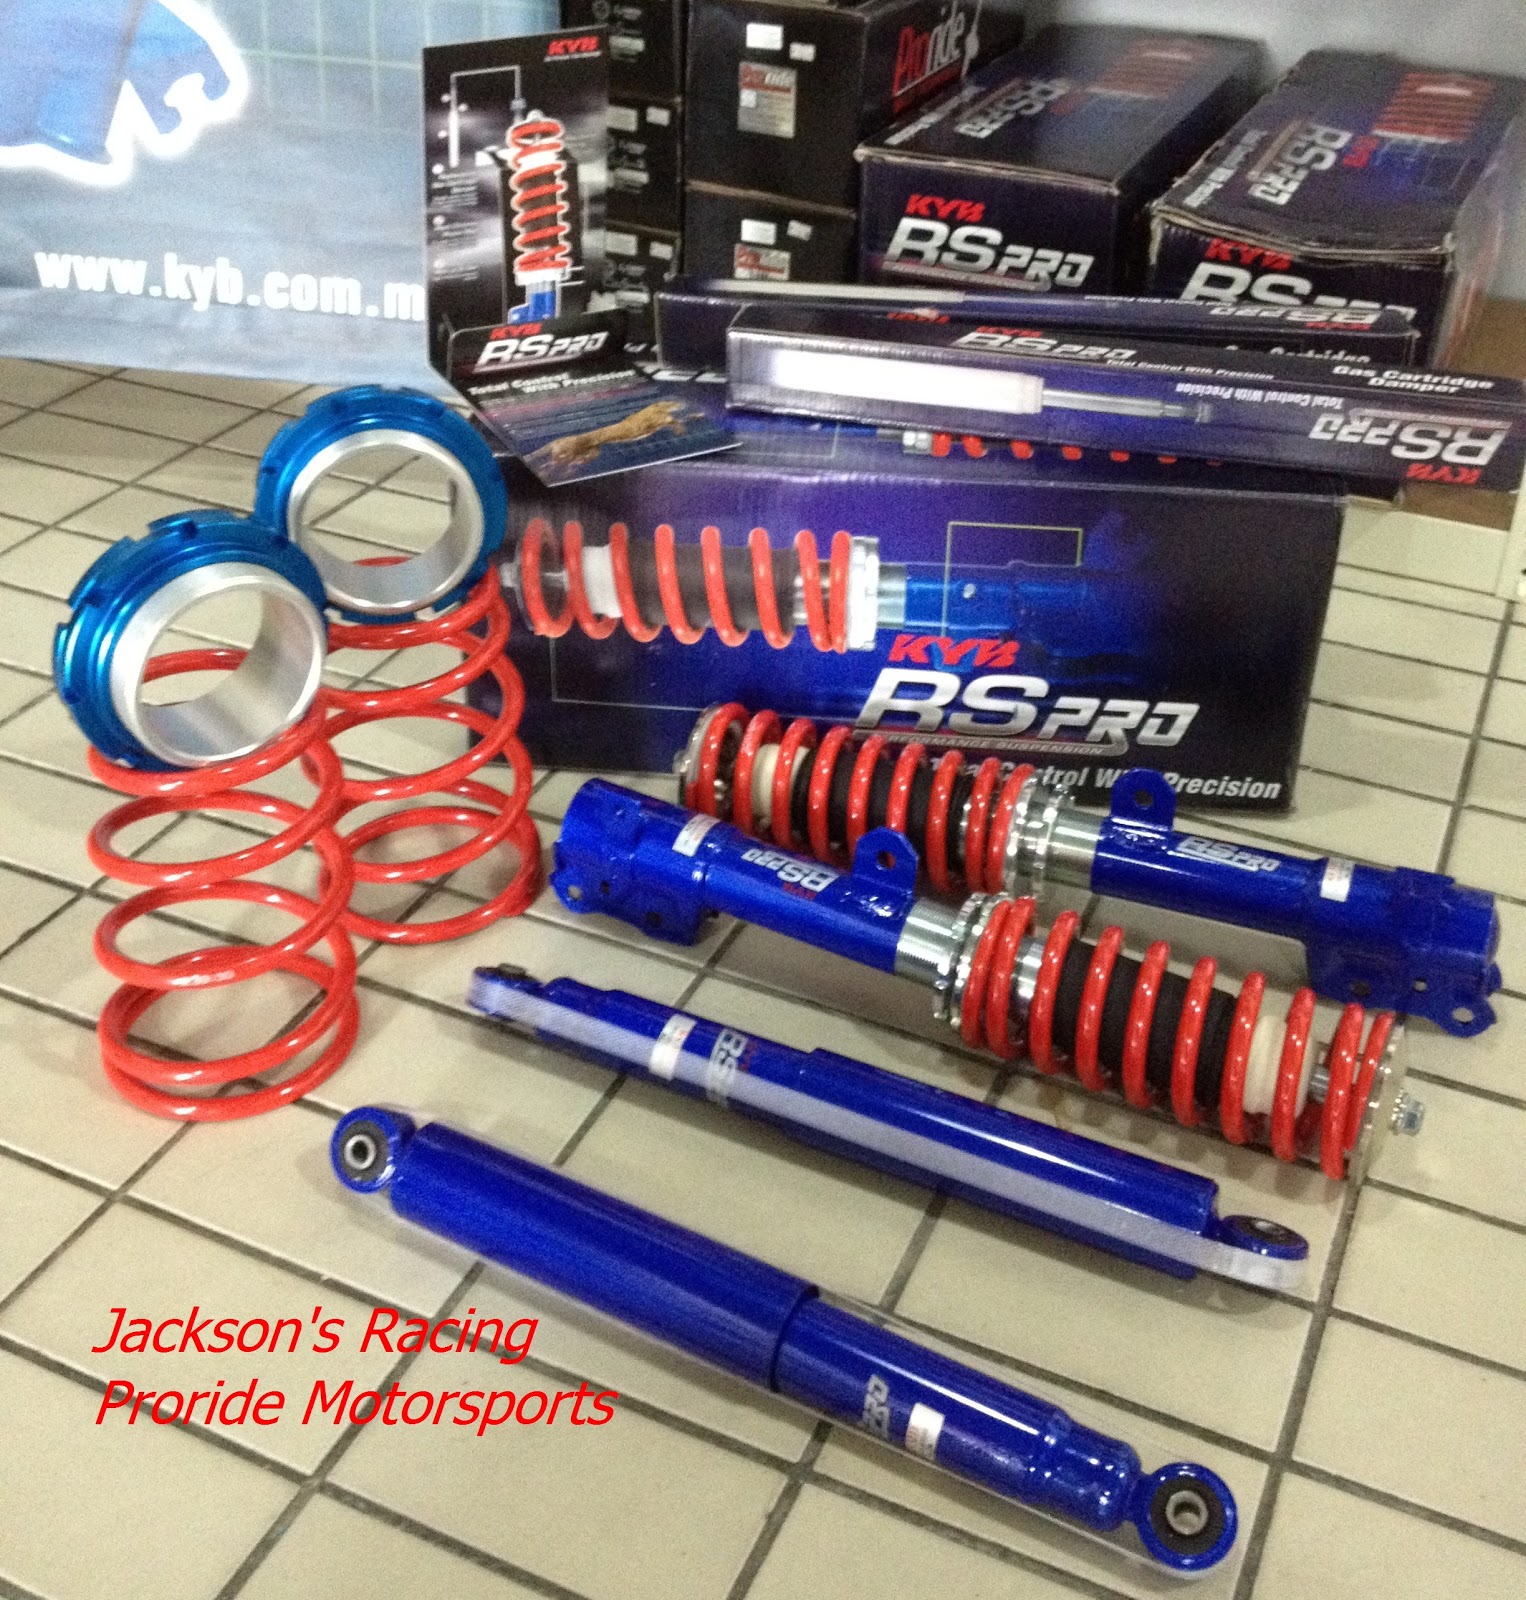 Pro-ride Motorsports: KYB RS PRO Adjustable Suspension for 